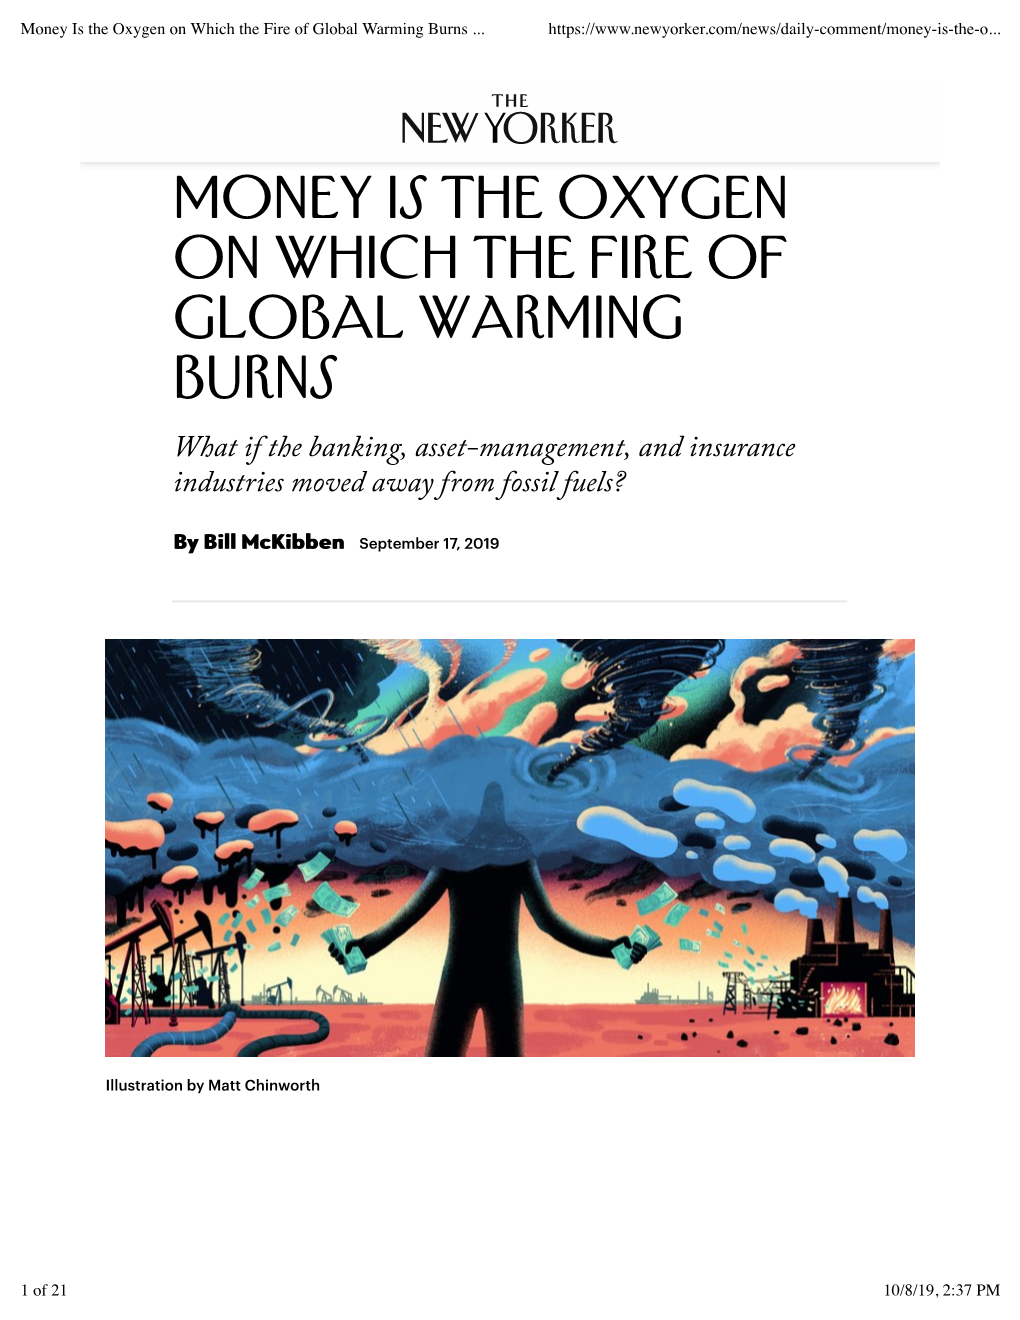 Money Is the Oxygen on Which the Fire of Global Warming Burns